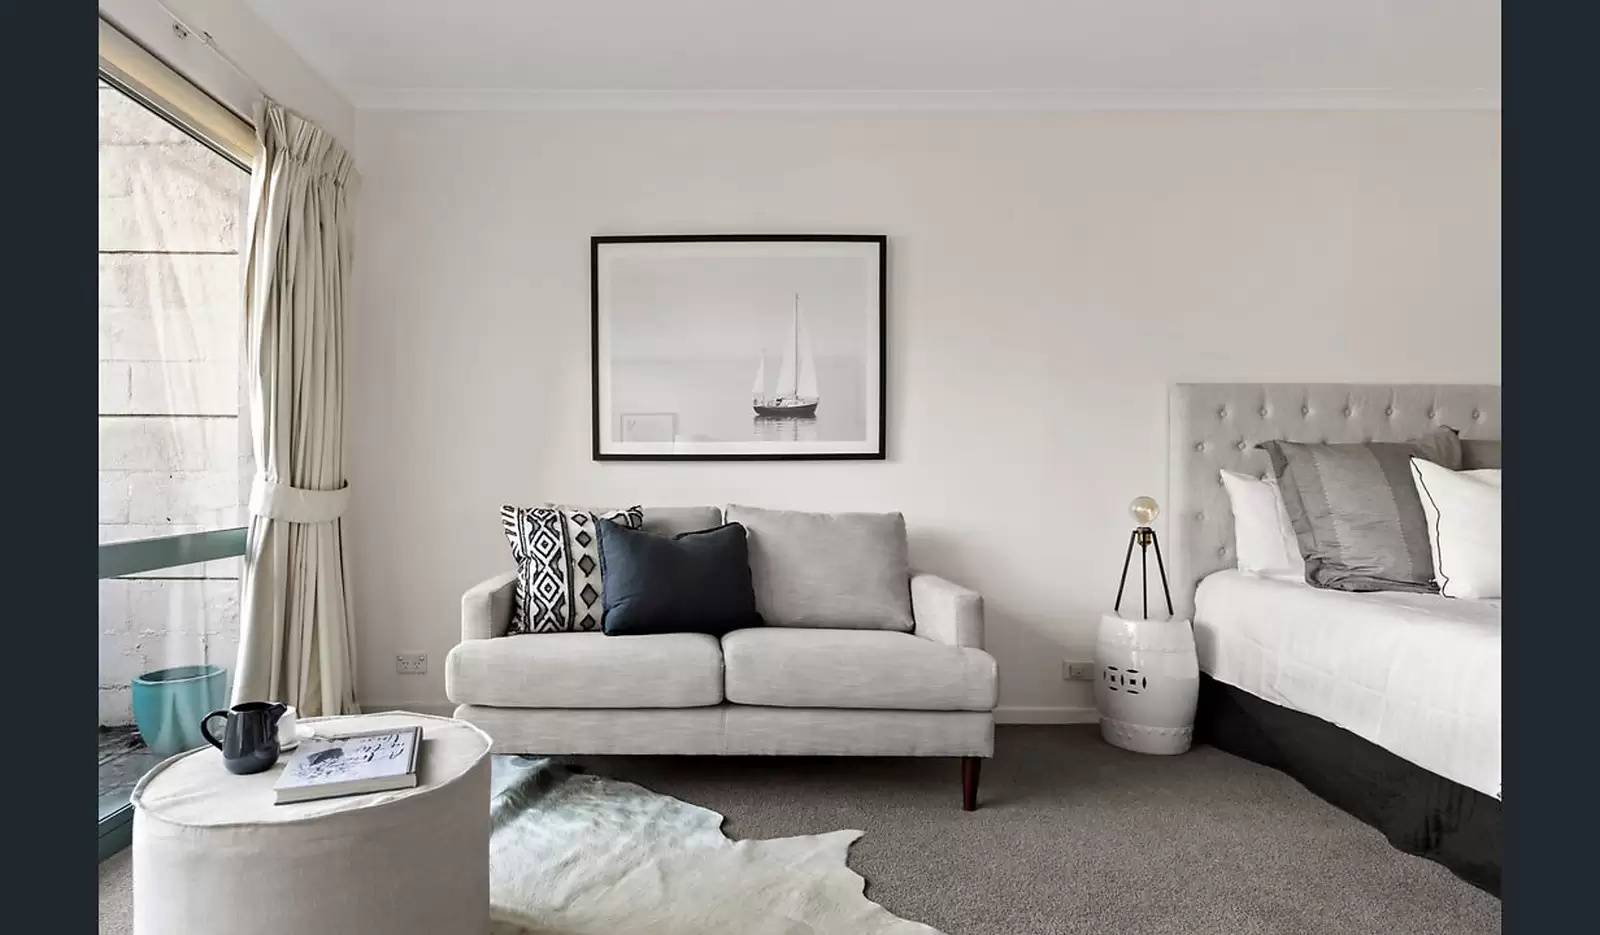 Photo #3: 100/155 Missenden Road, Newtown - Sold by Sydney Sotheby's International Realty